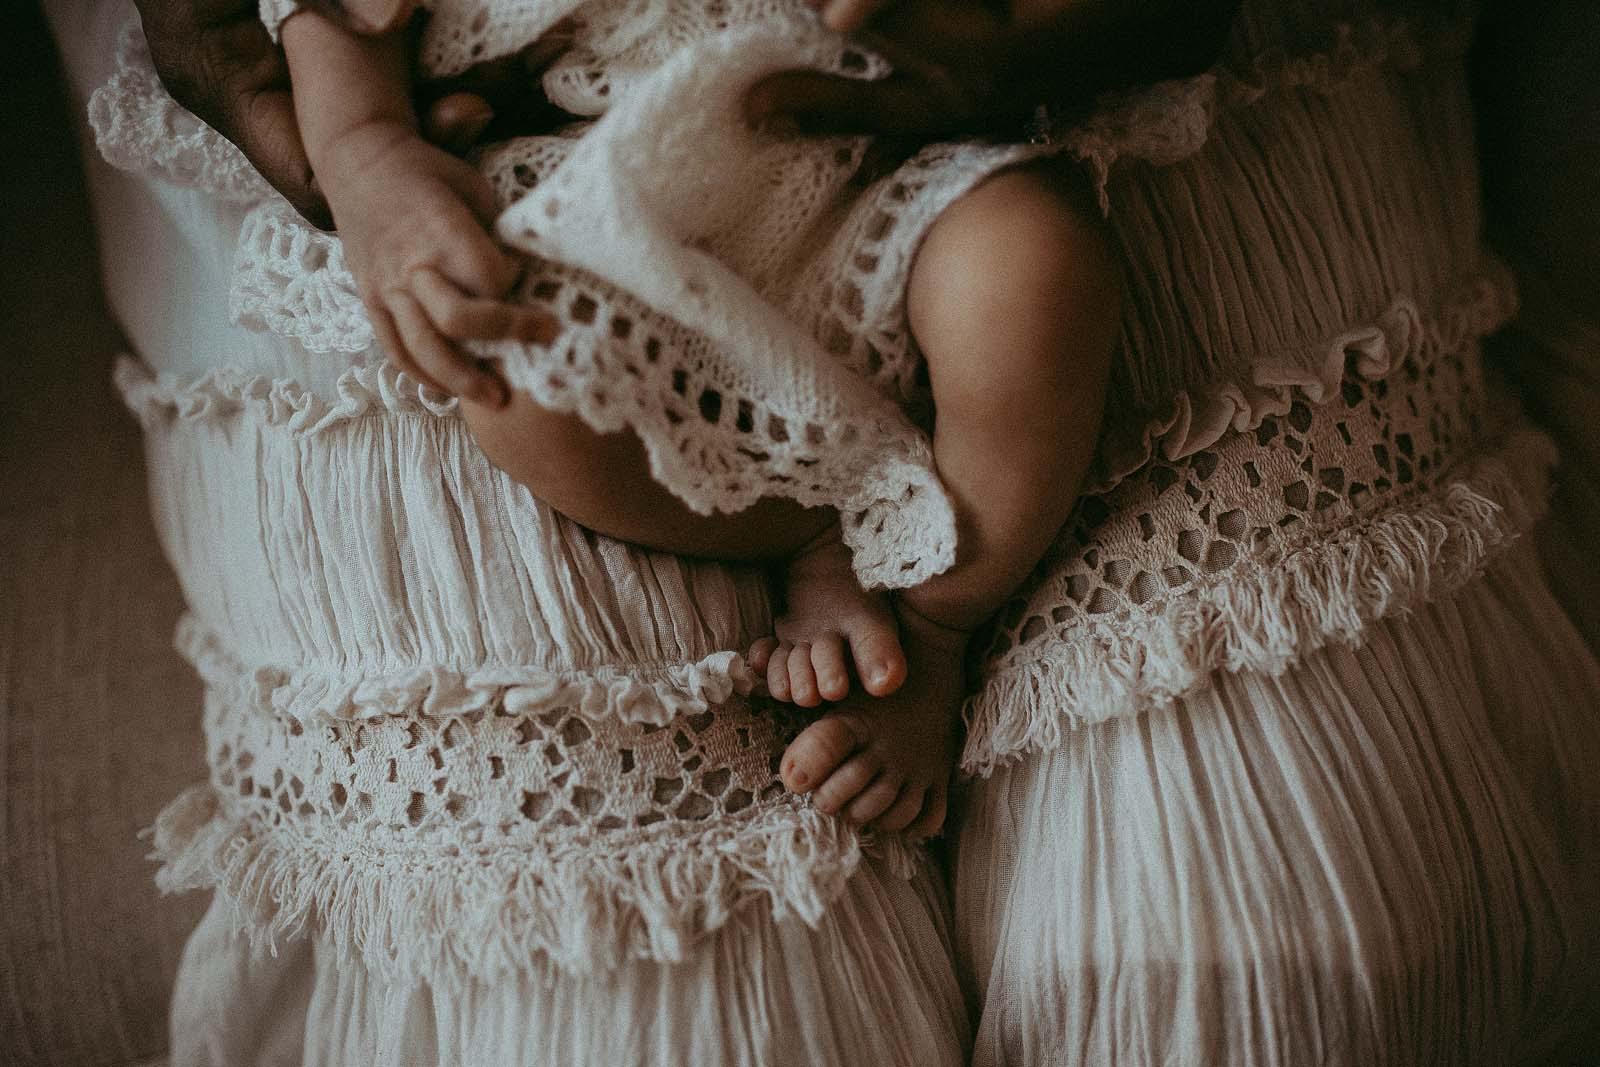 Tender moments captured by Victoria Vasilyeva Photography at Carrboro Midwifery, featuring a newborn boy in a delightful boho crochet white romper.